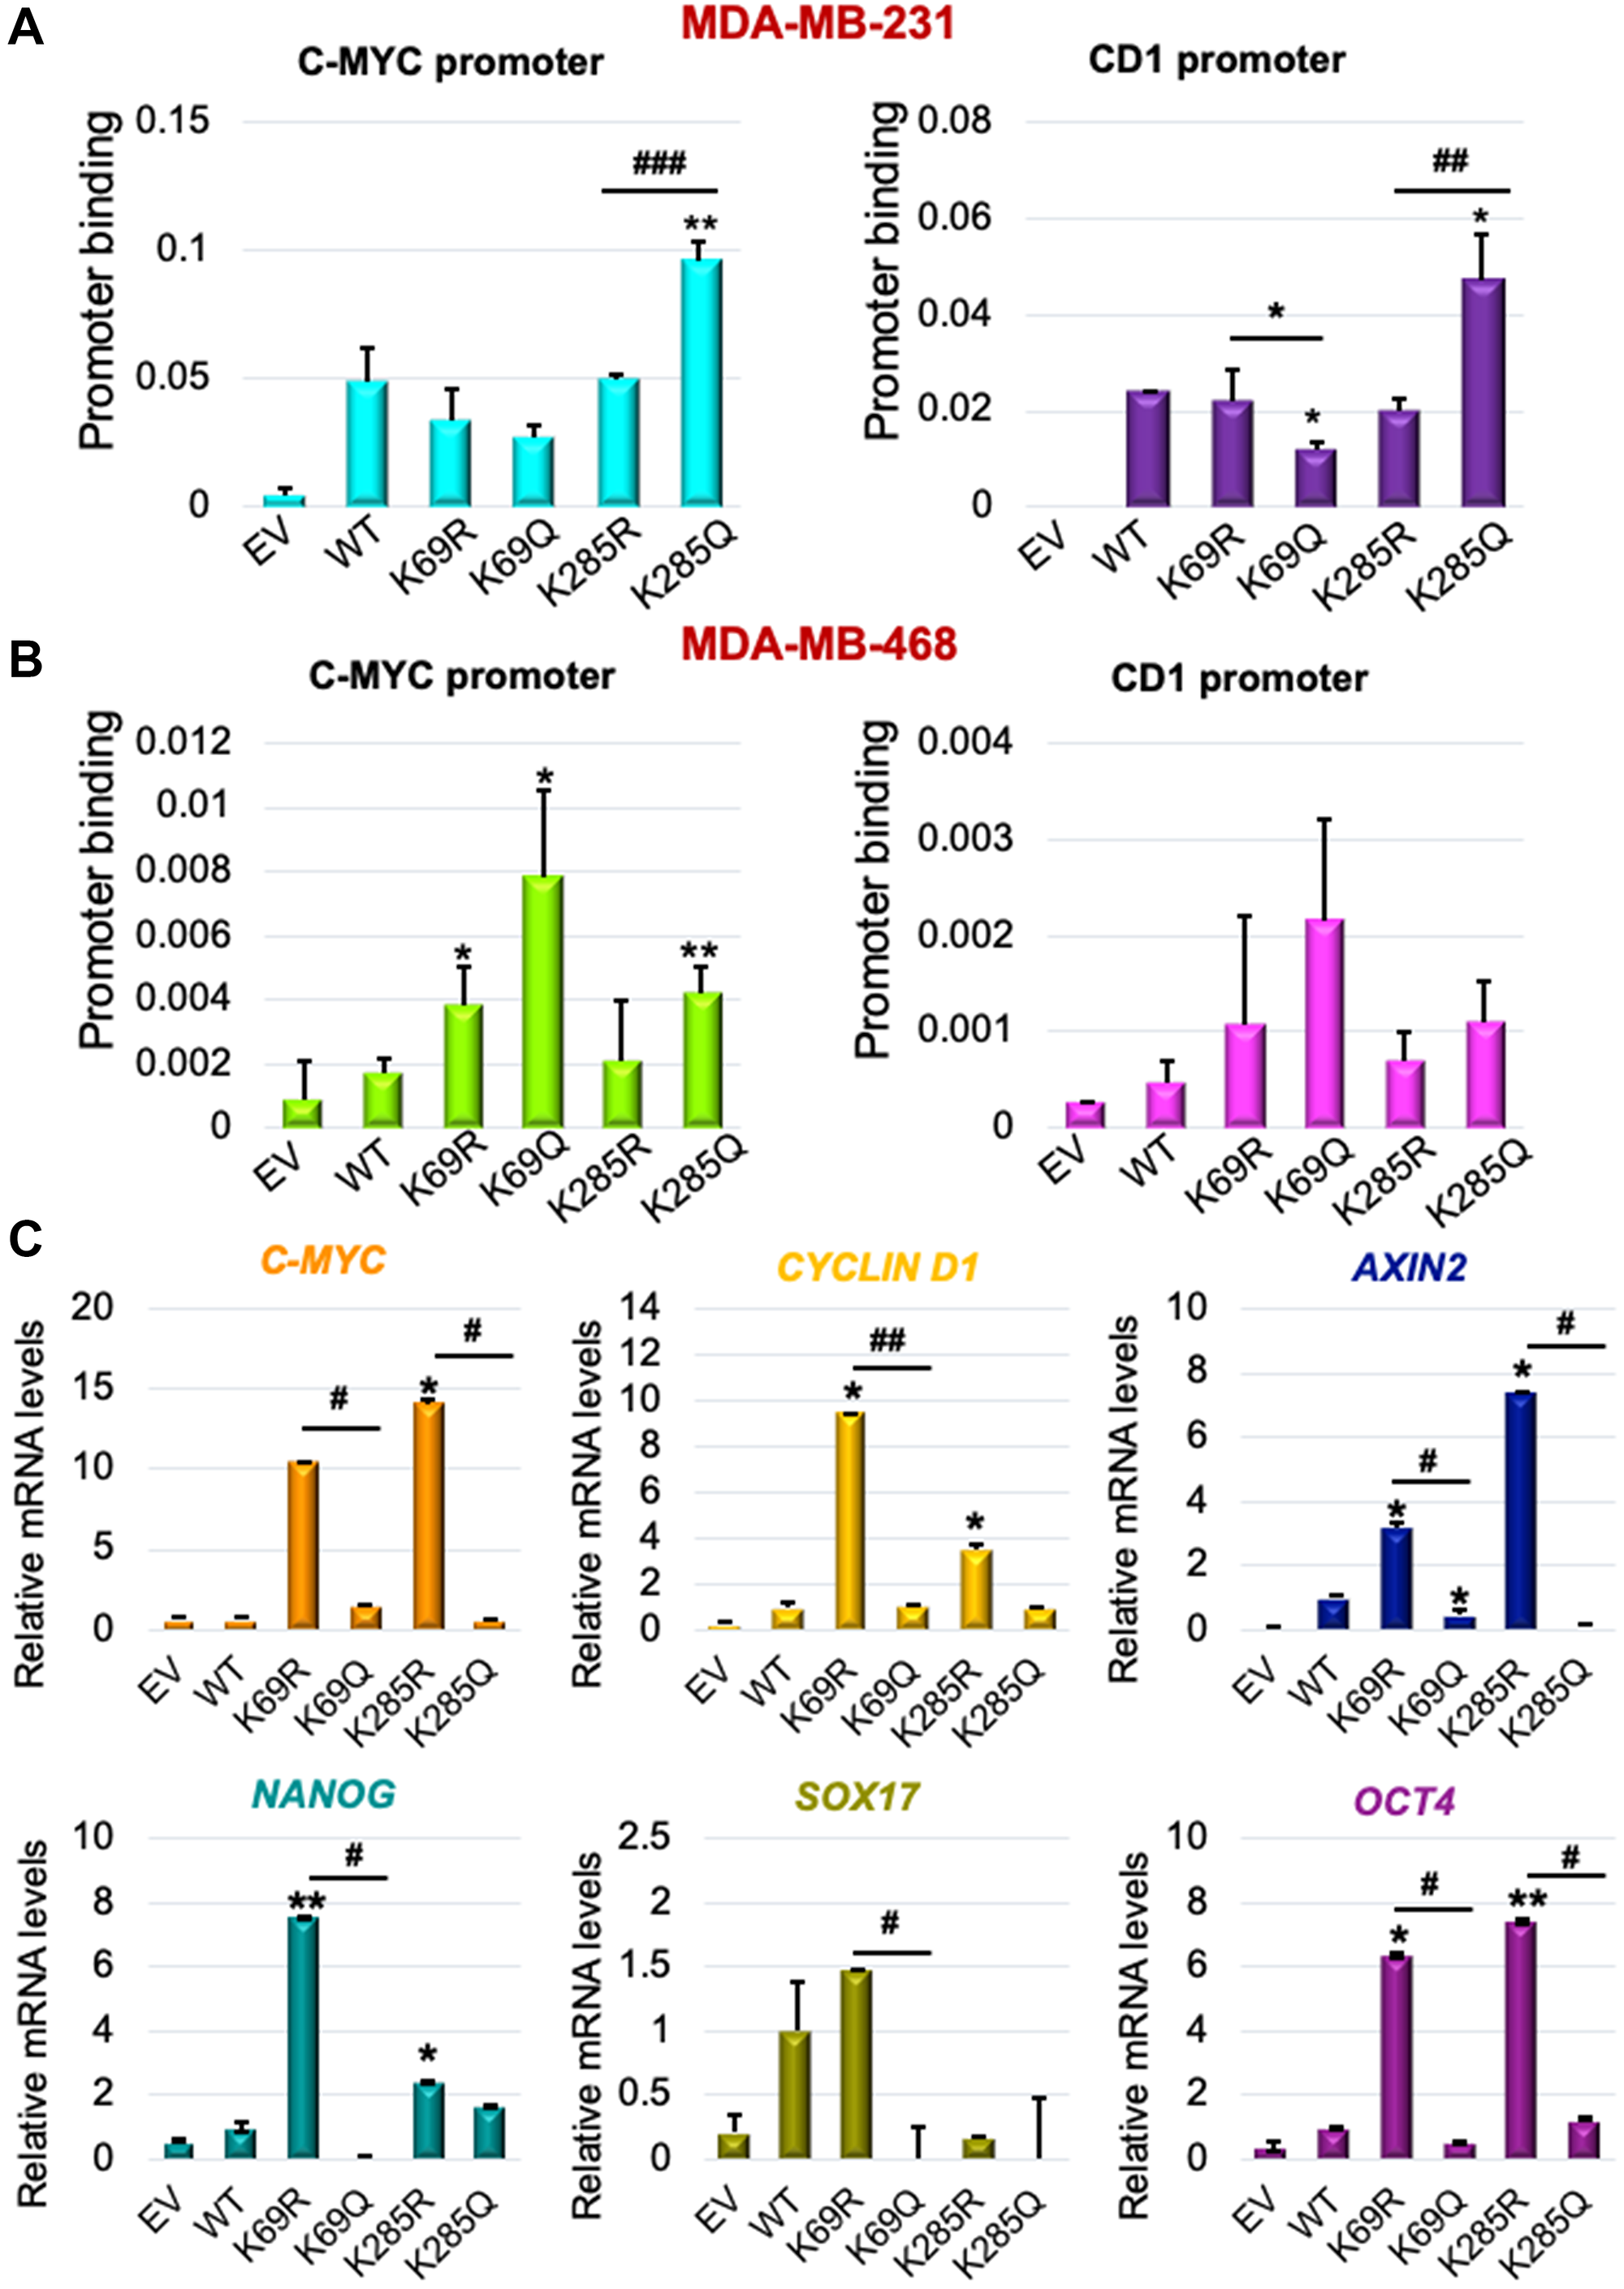 K69 and K285 lysine residues influences its binding and regulation of WNT target genes in triple-negative breast cancer models.